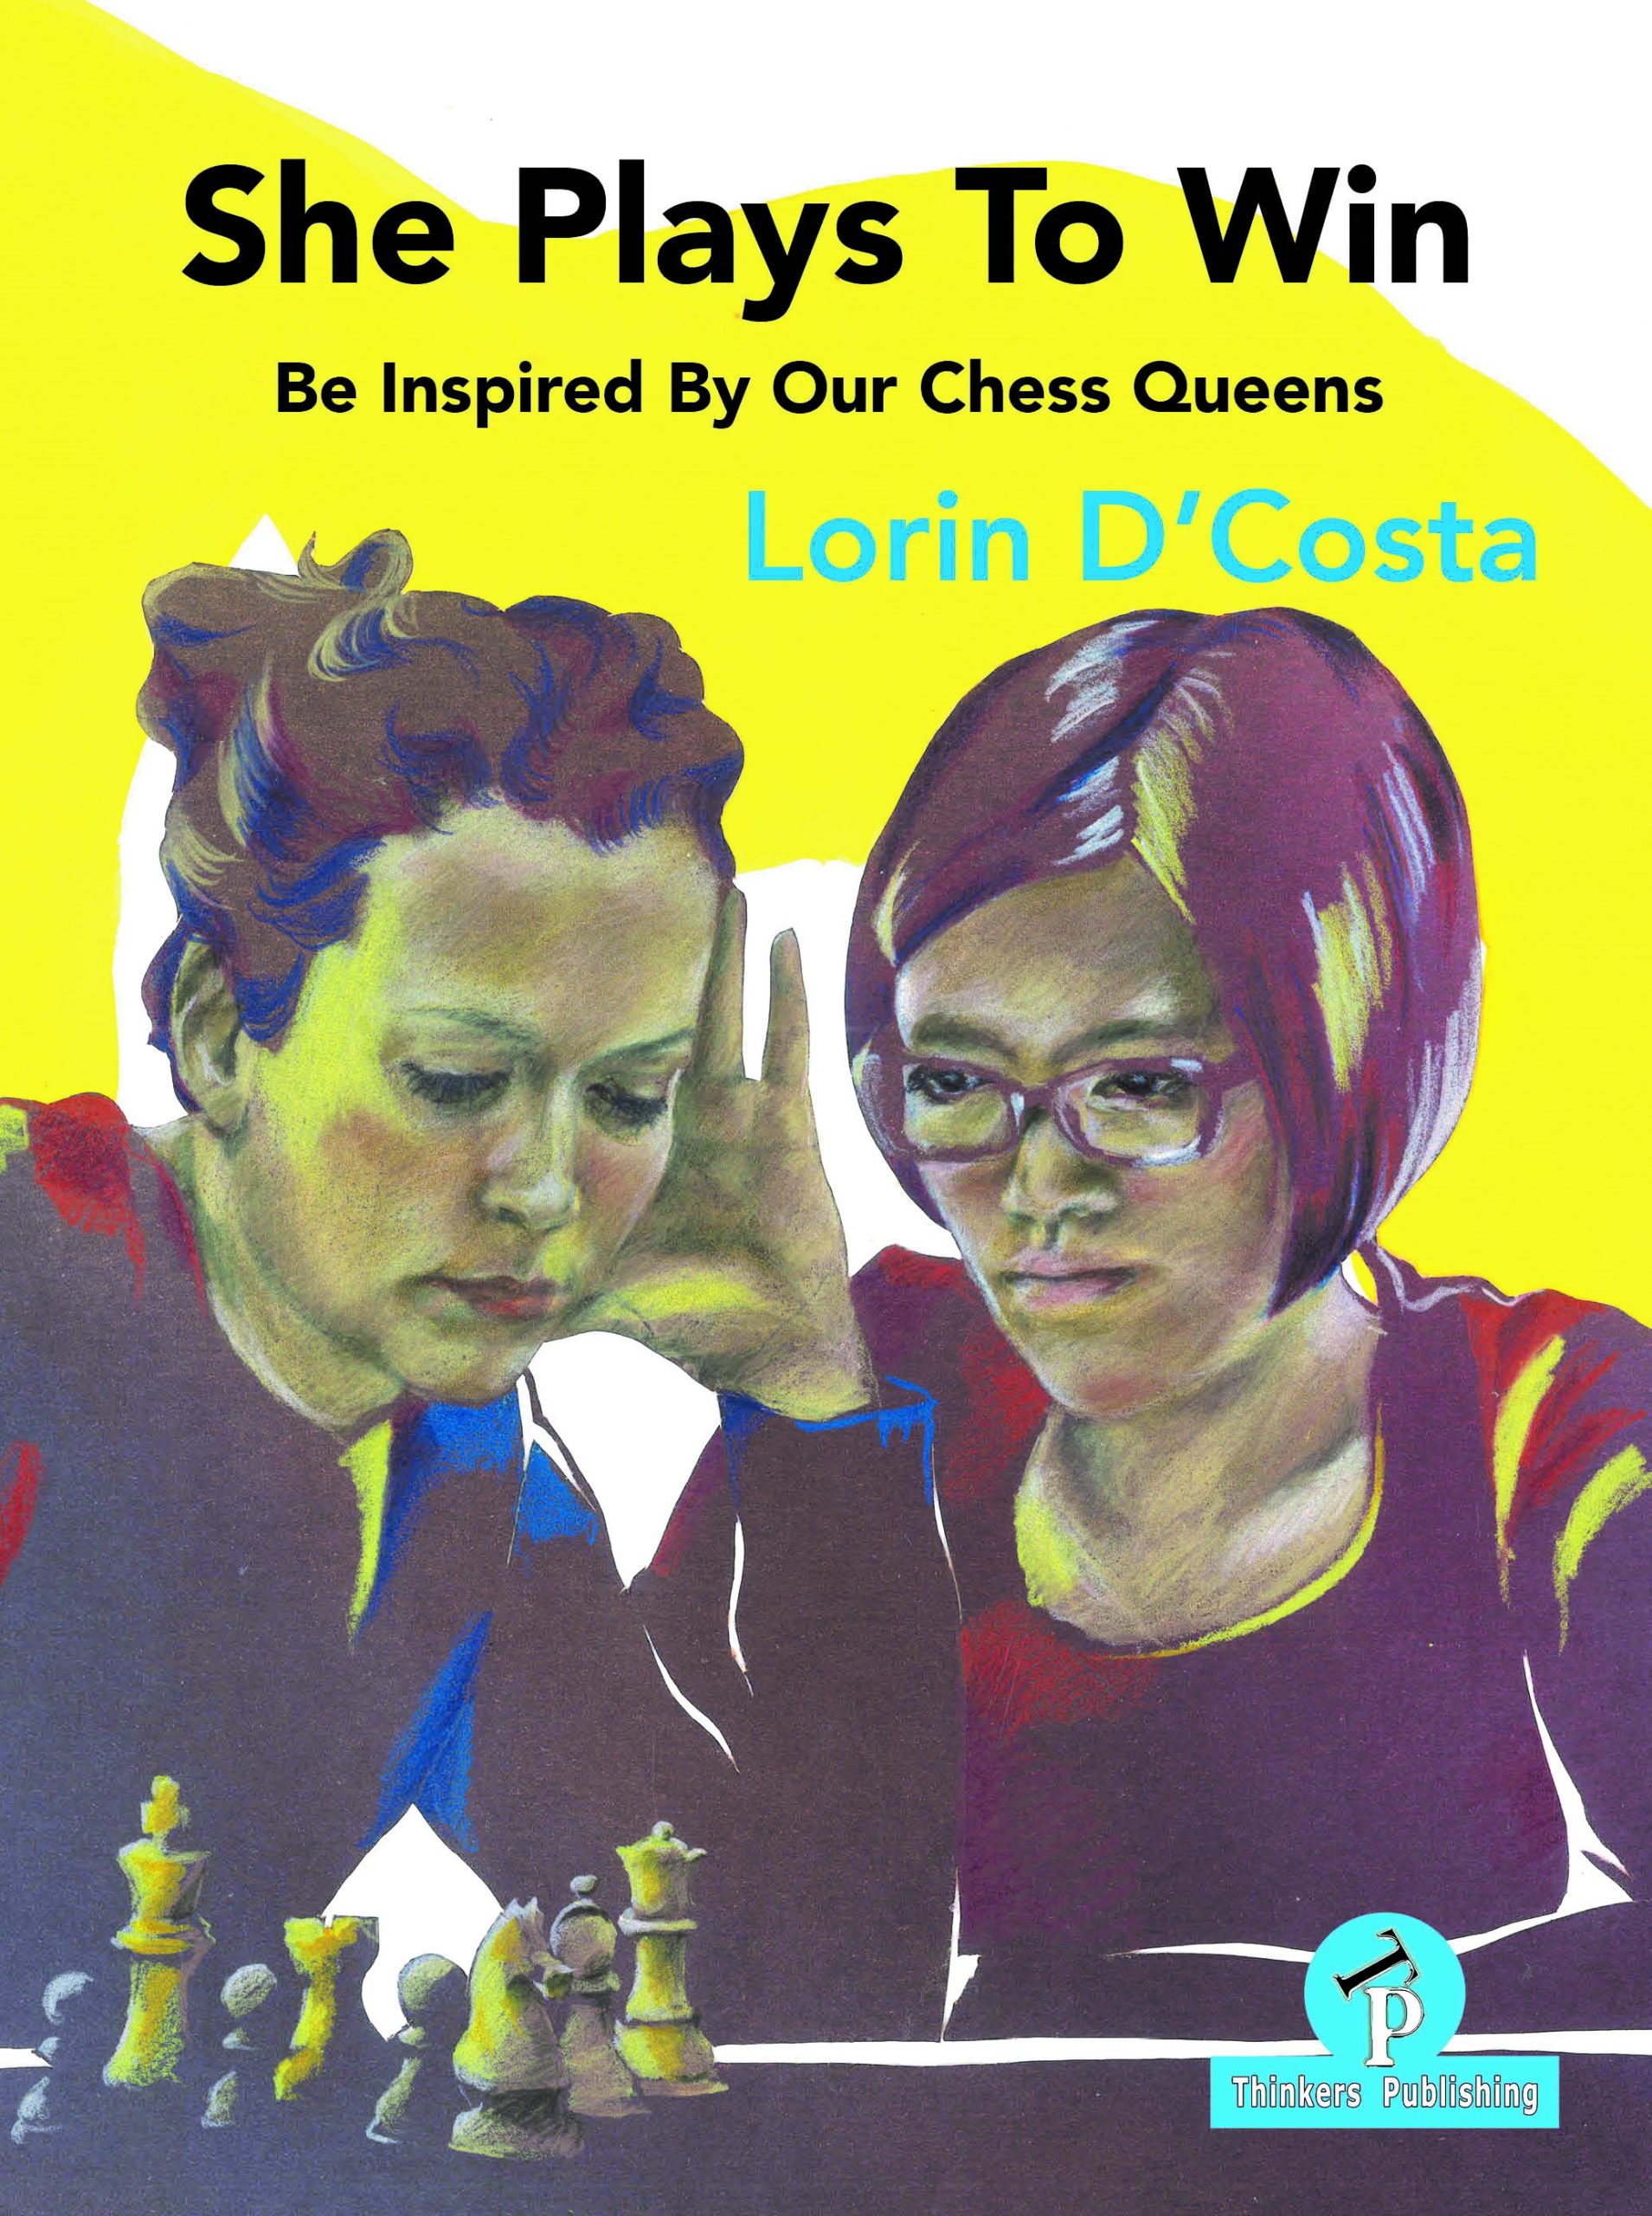 Queens Coaches - Magnus Chess Academy